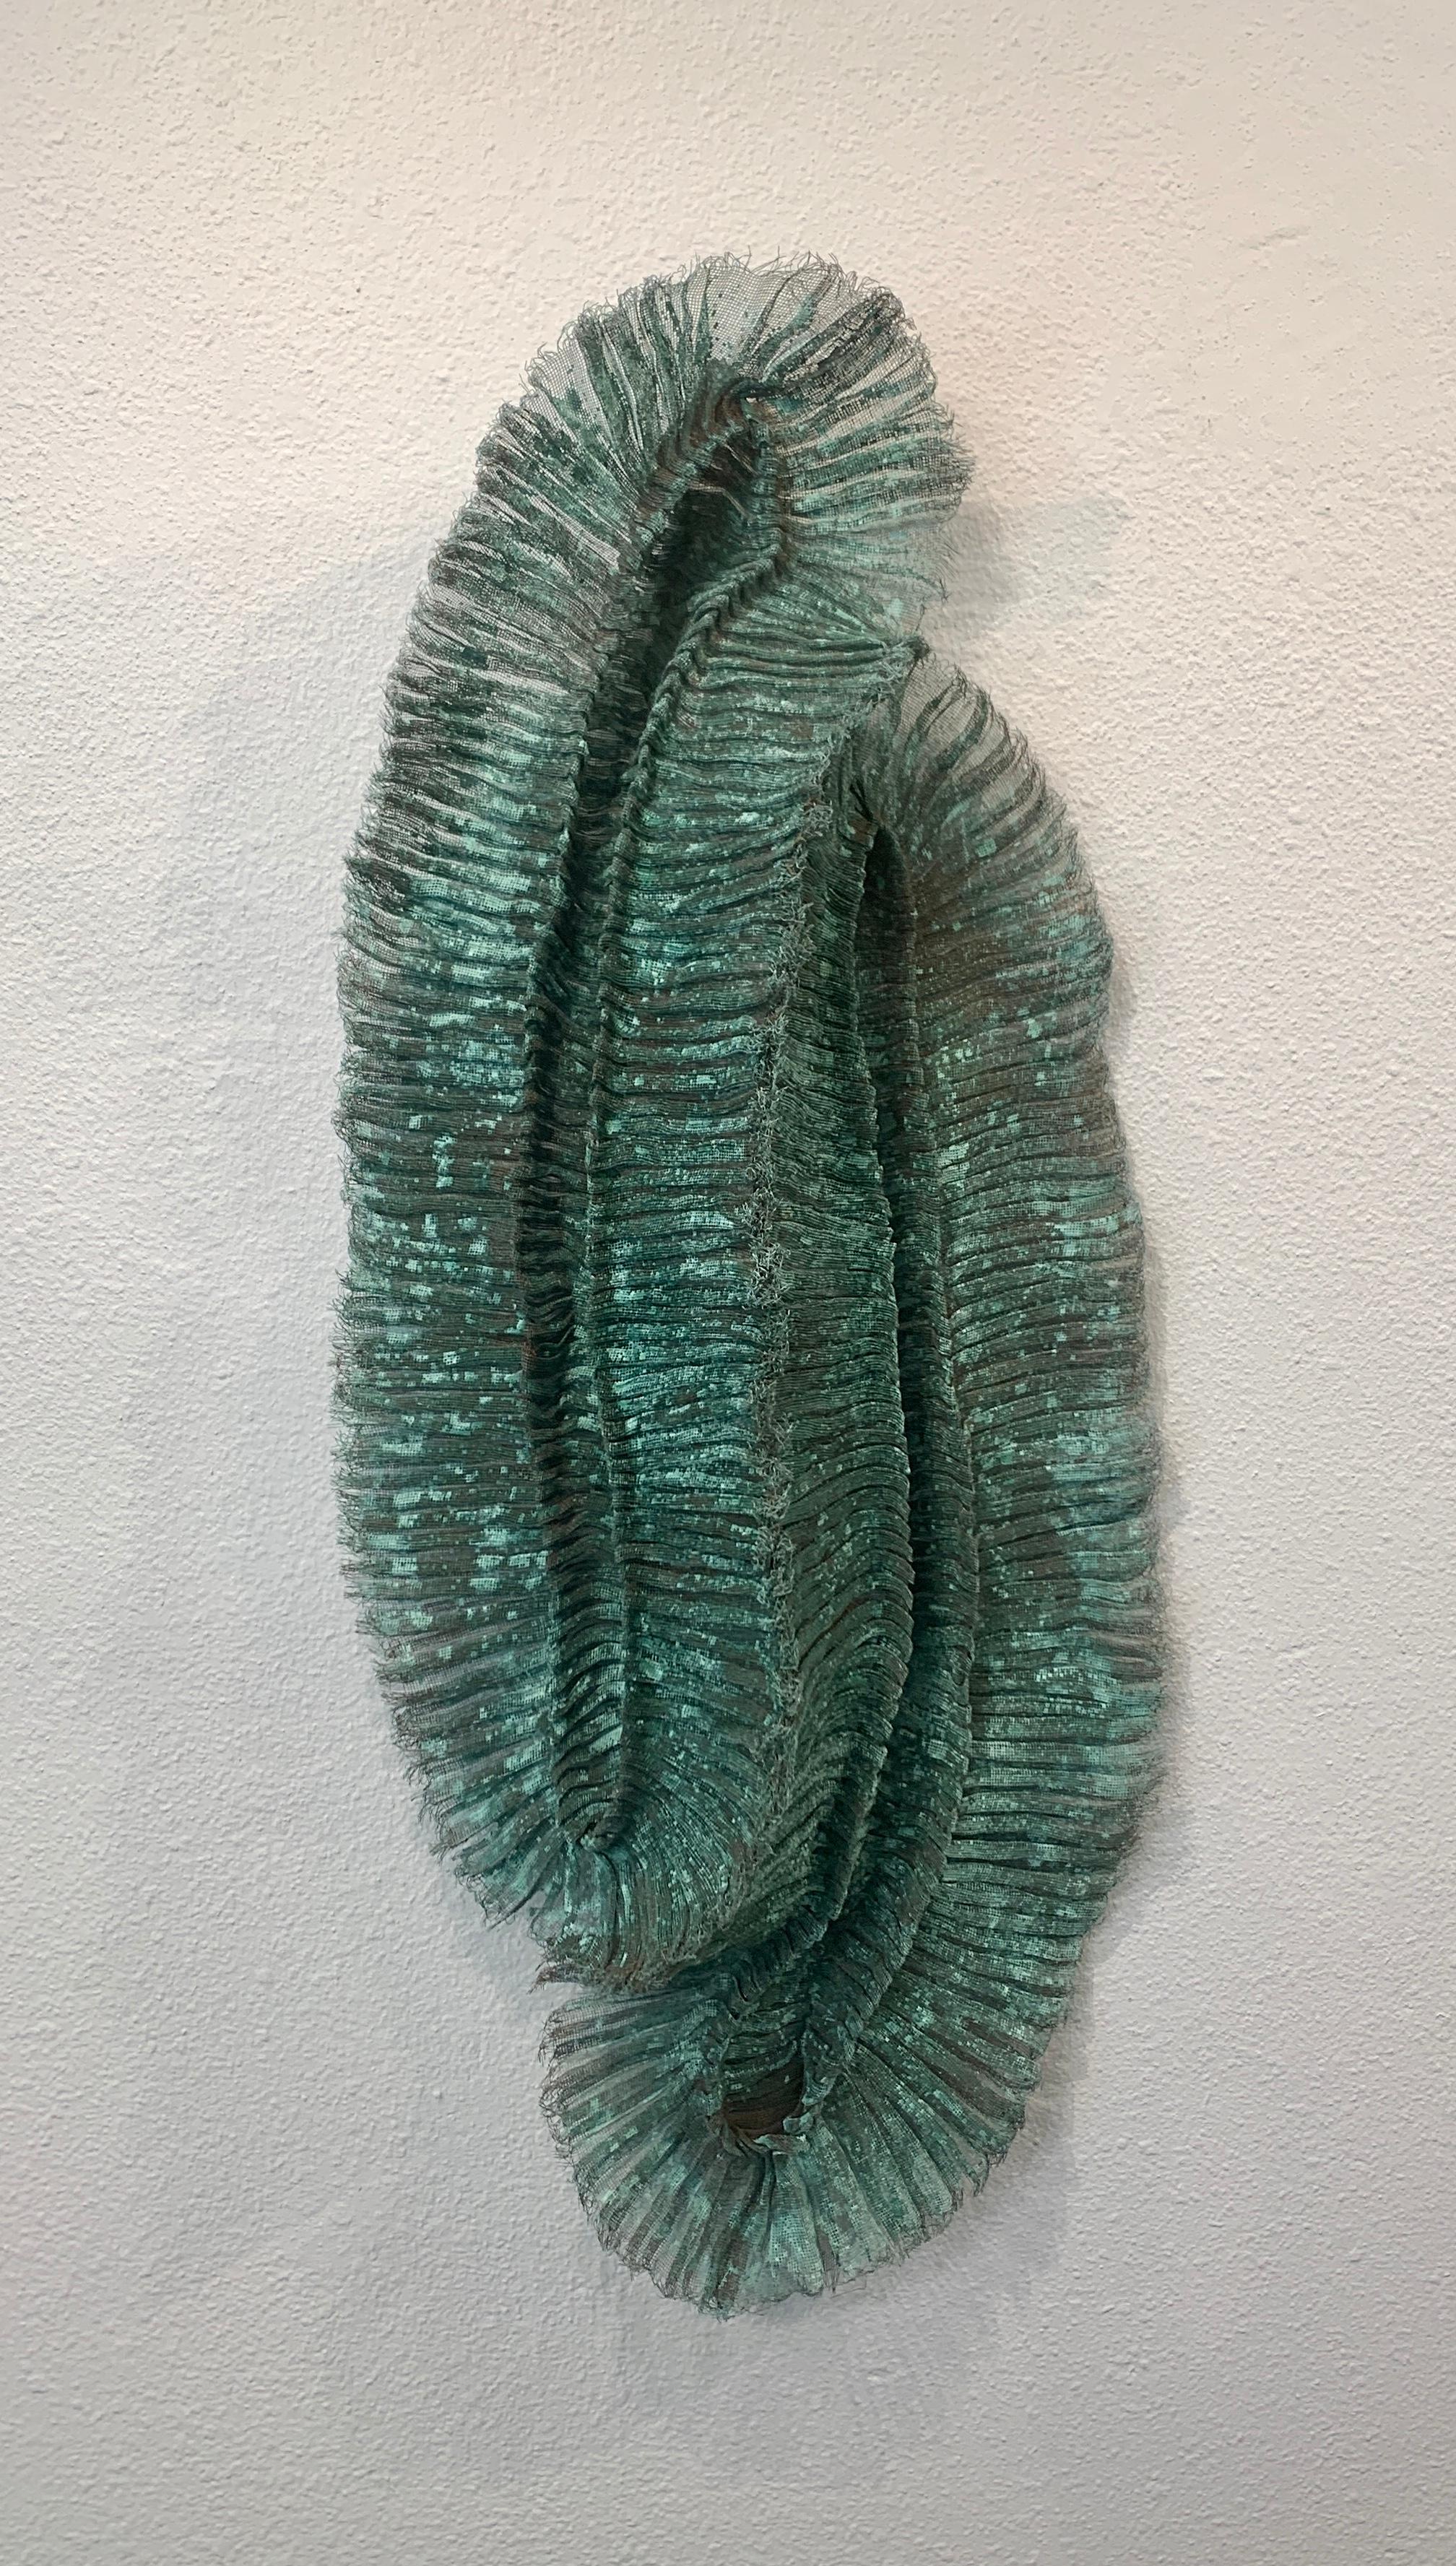 Flora Dido, Atticus Adams Mesh Wall Sculpture Copper Mesh & Verdigris Patina

Metal fiber sculpture that incorporates fascinating light and shadow into its form.
​​
From Atticus Adams:
​
“I like to think of my work as Neo-Appalachian Folk